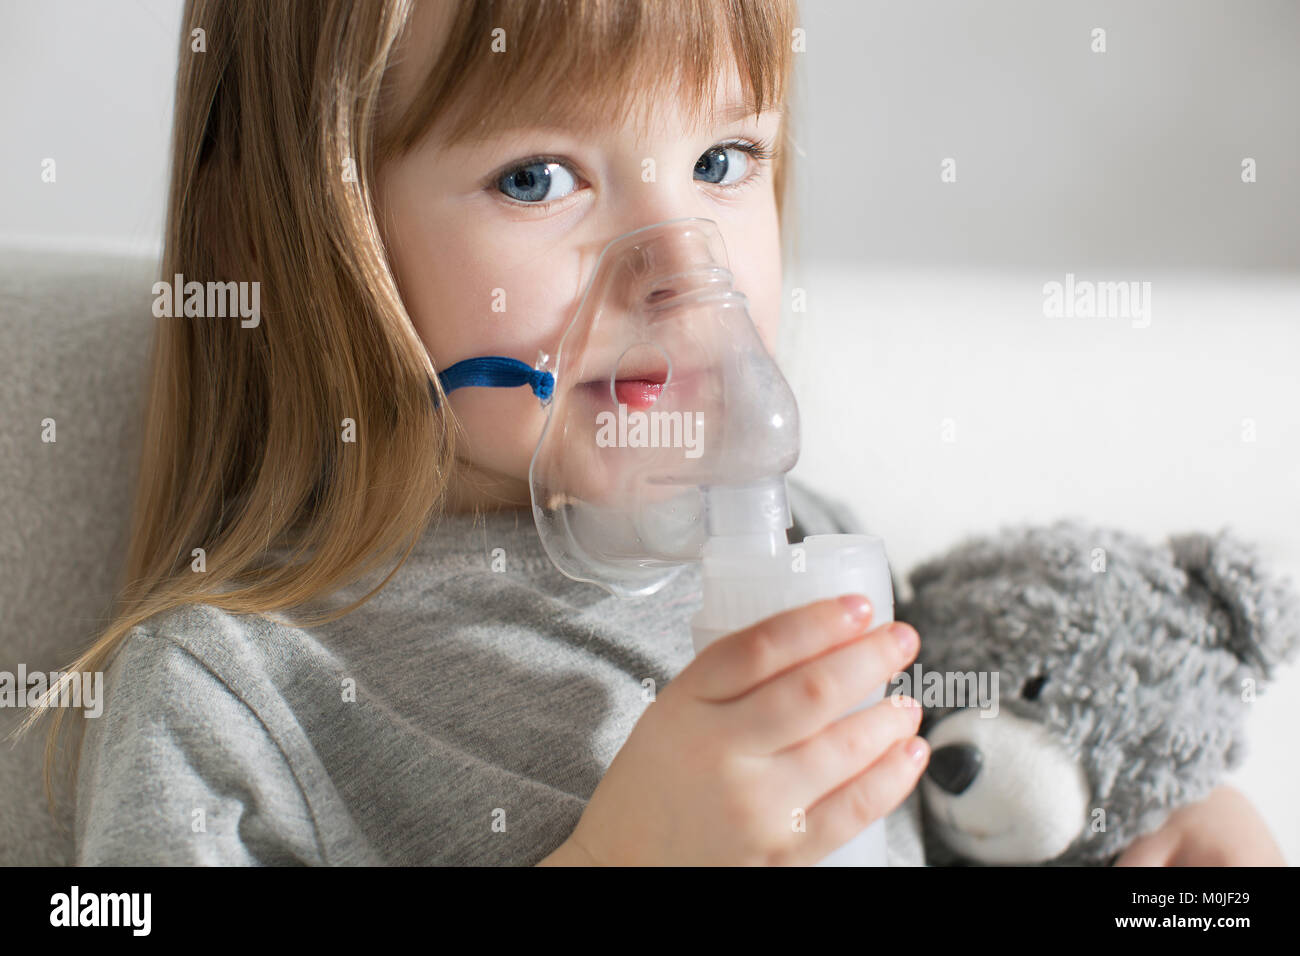 Little girl making inhalation with nebulizer at home. child asthma inhaler inhalation nebulizer steam sick cough concept Horizontal Stock Photo